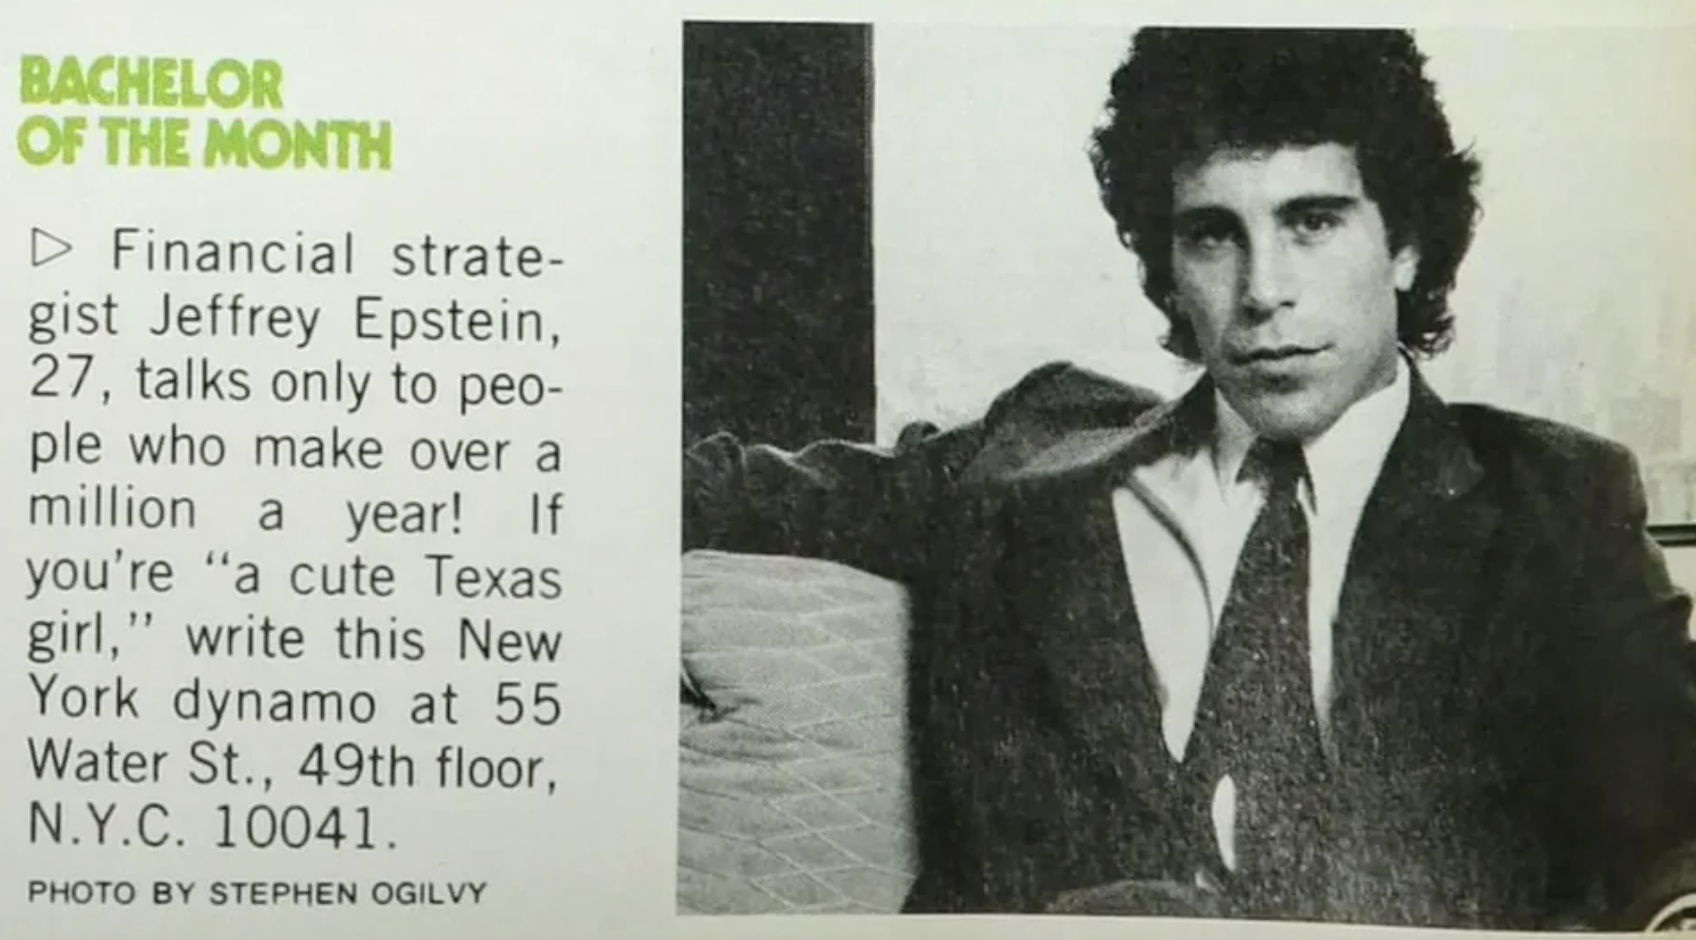 jeffrey epstein in high school - Bachelor Of The Month Financial strate gist Jeffrey Epstein, 27, talks only to peo ple who make over a million a year! If you're "a cute Texas girl," write this New York dynamo at 55 Water St., 49th floor, N.Y.C. 10041. Ph